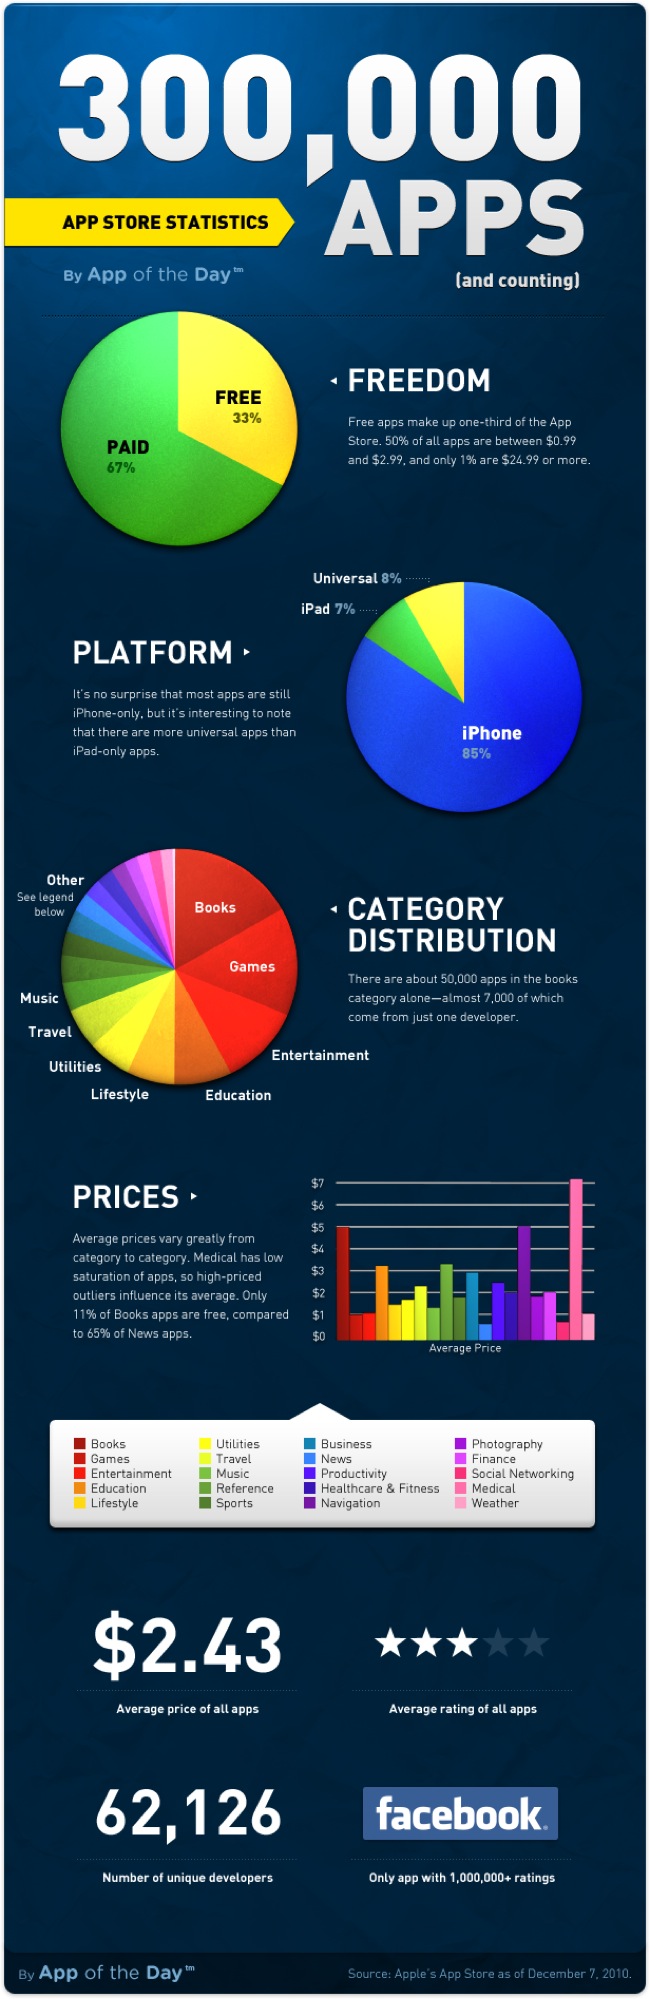 appstore-infographic.png